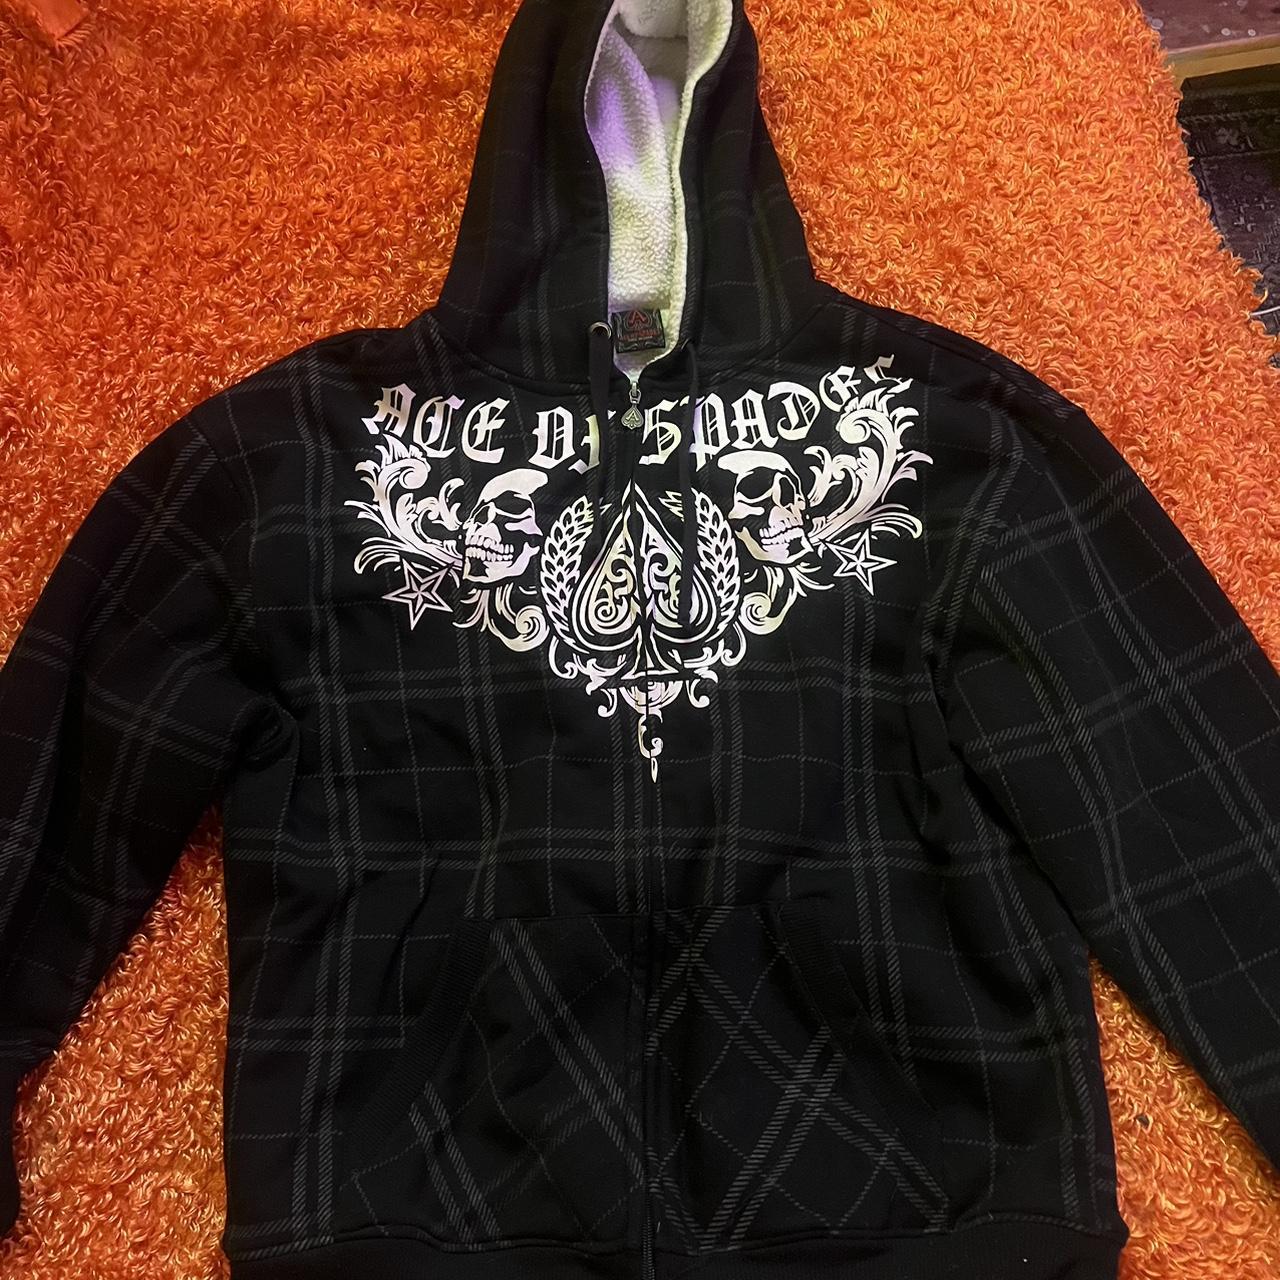 Ace of spades affliction zip up hoodie offers and... - Depop